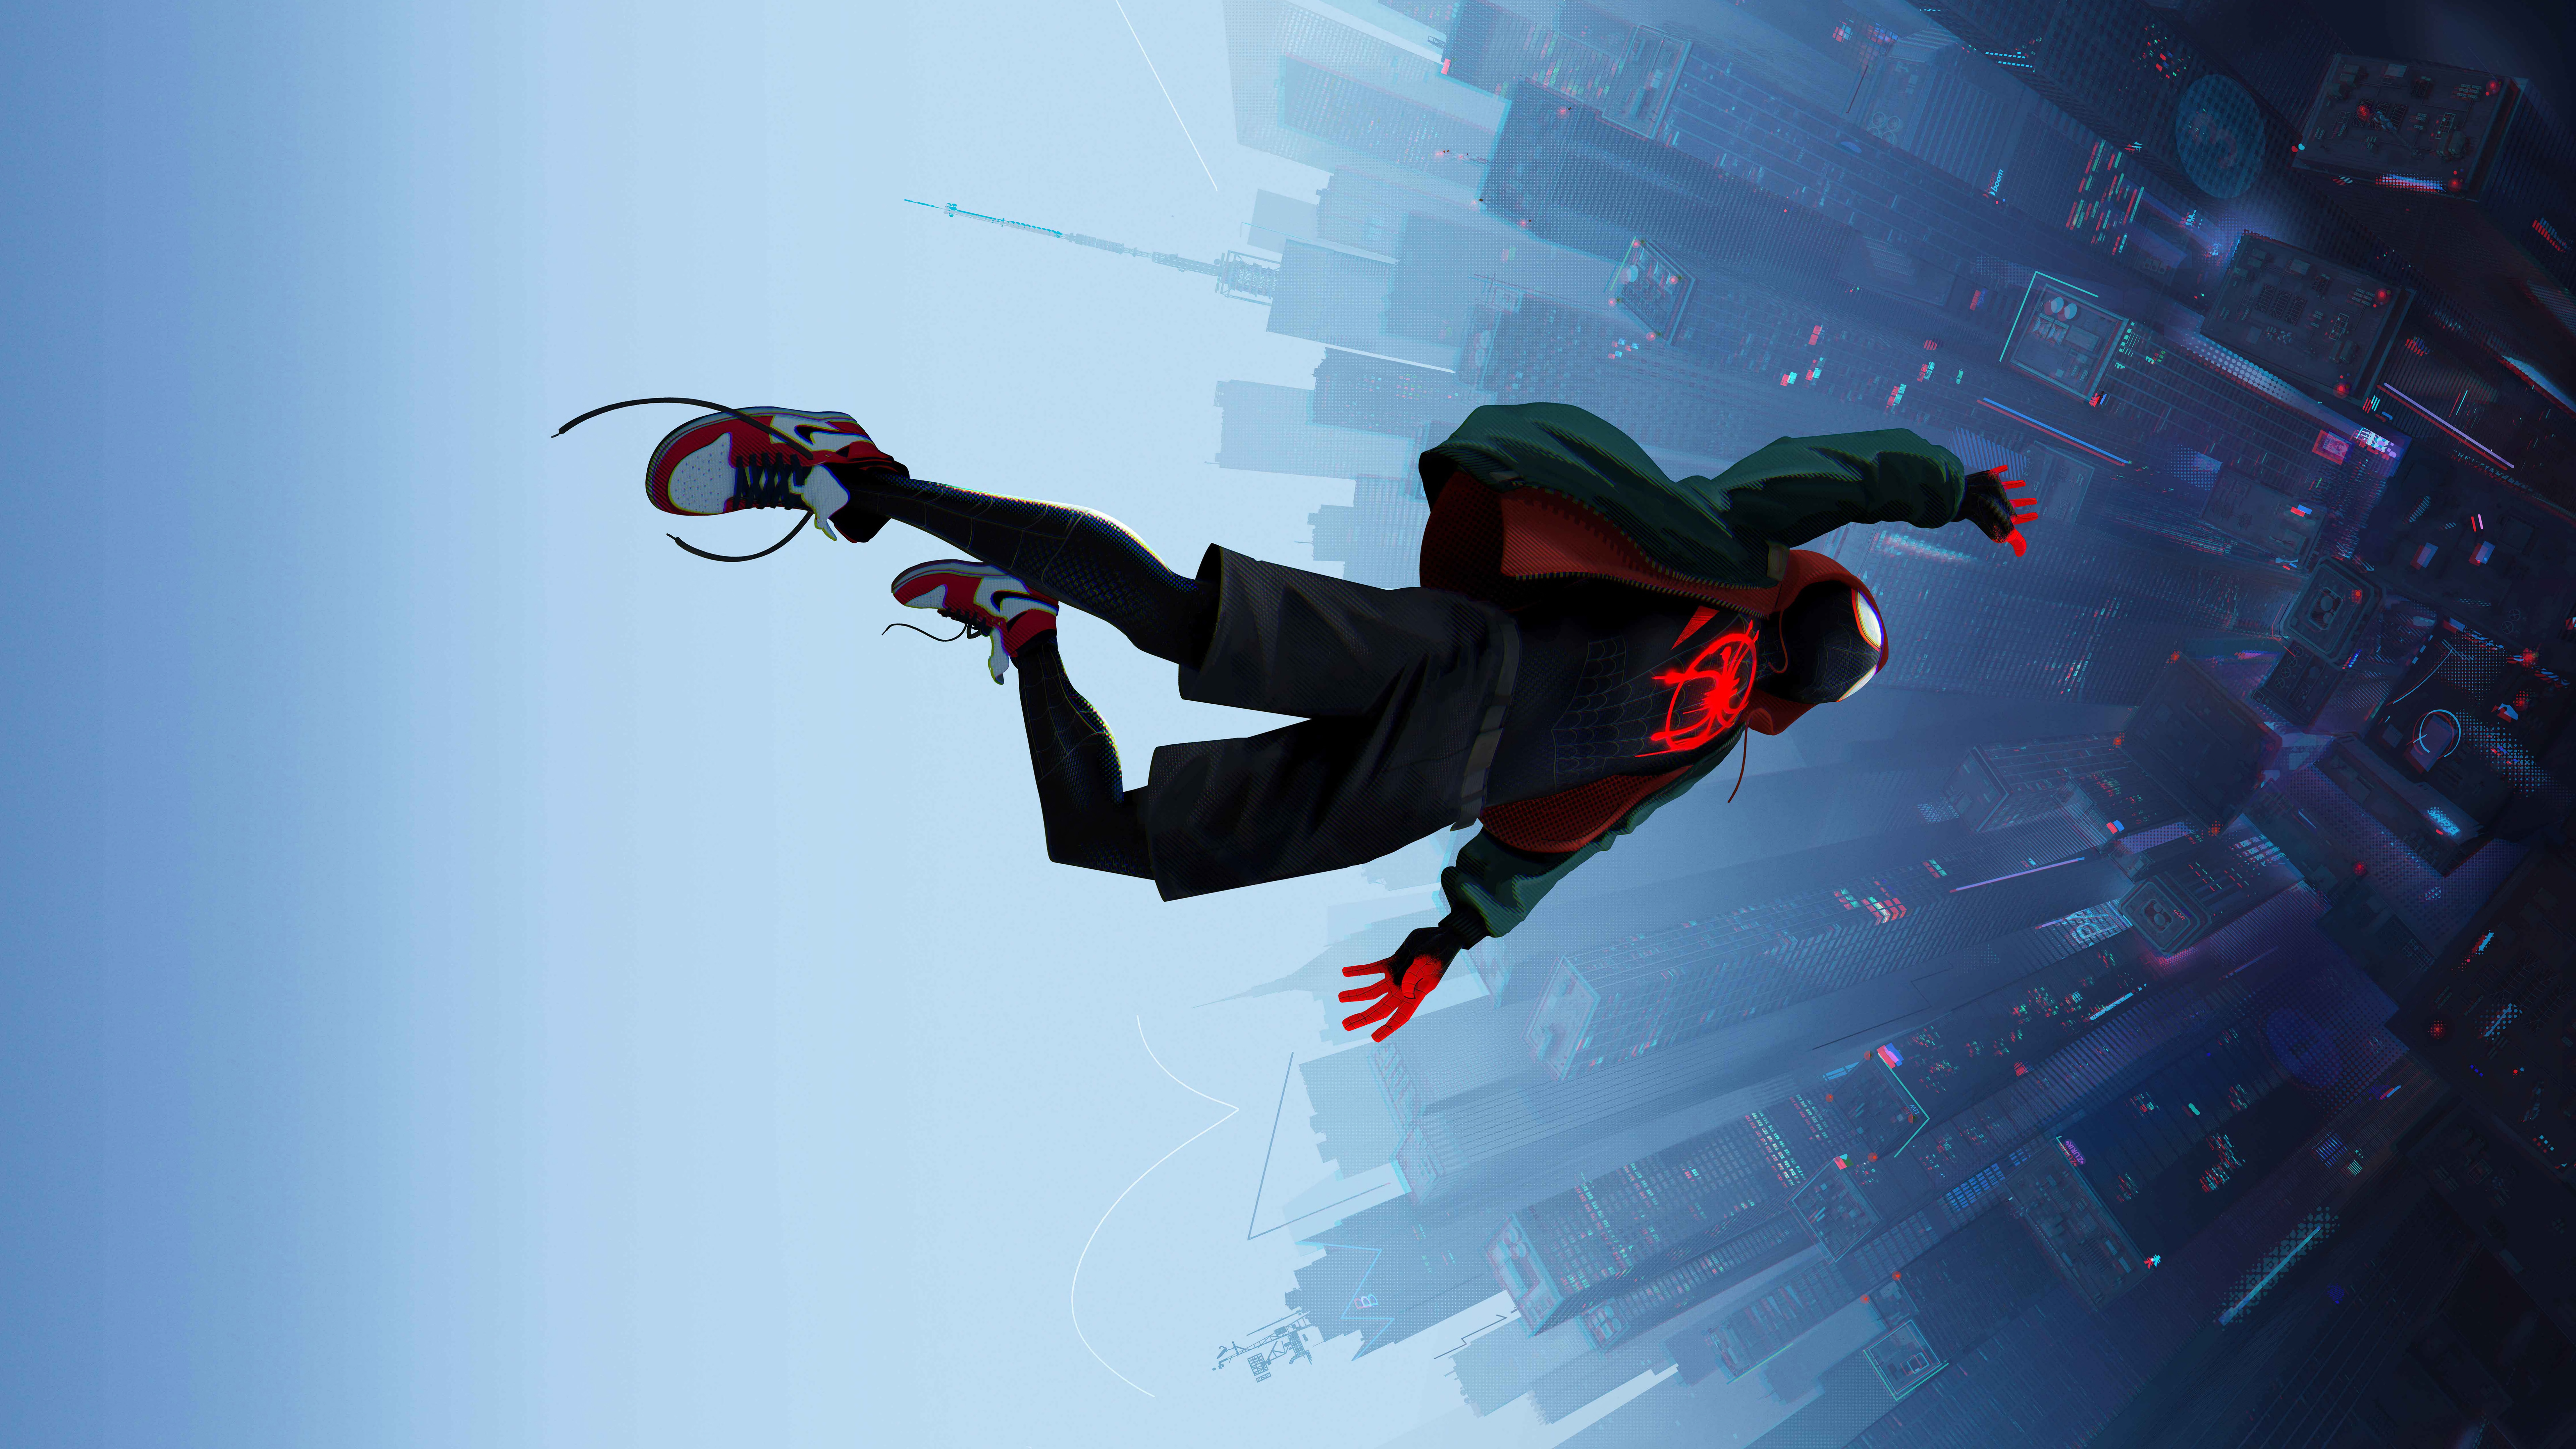 [24+] Spider Man Into The Spider Verse Wallpapers - WallpaperSafari